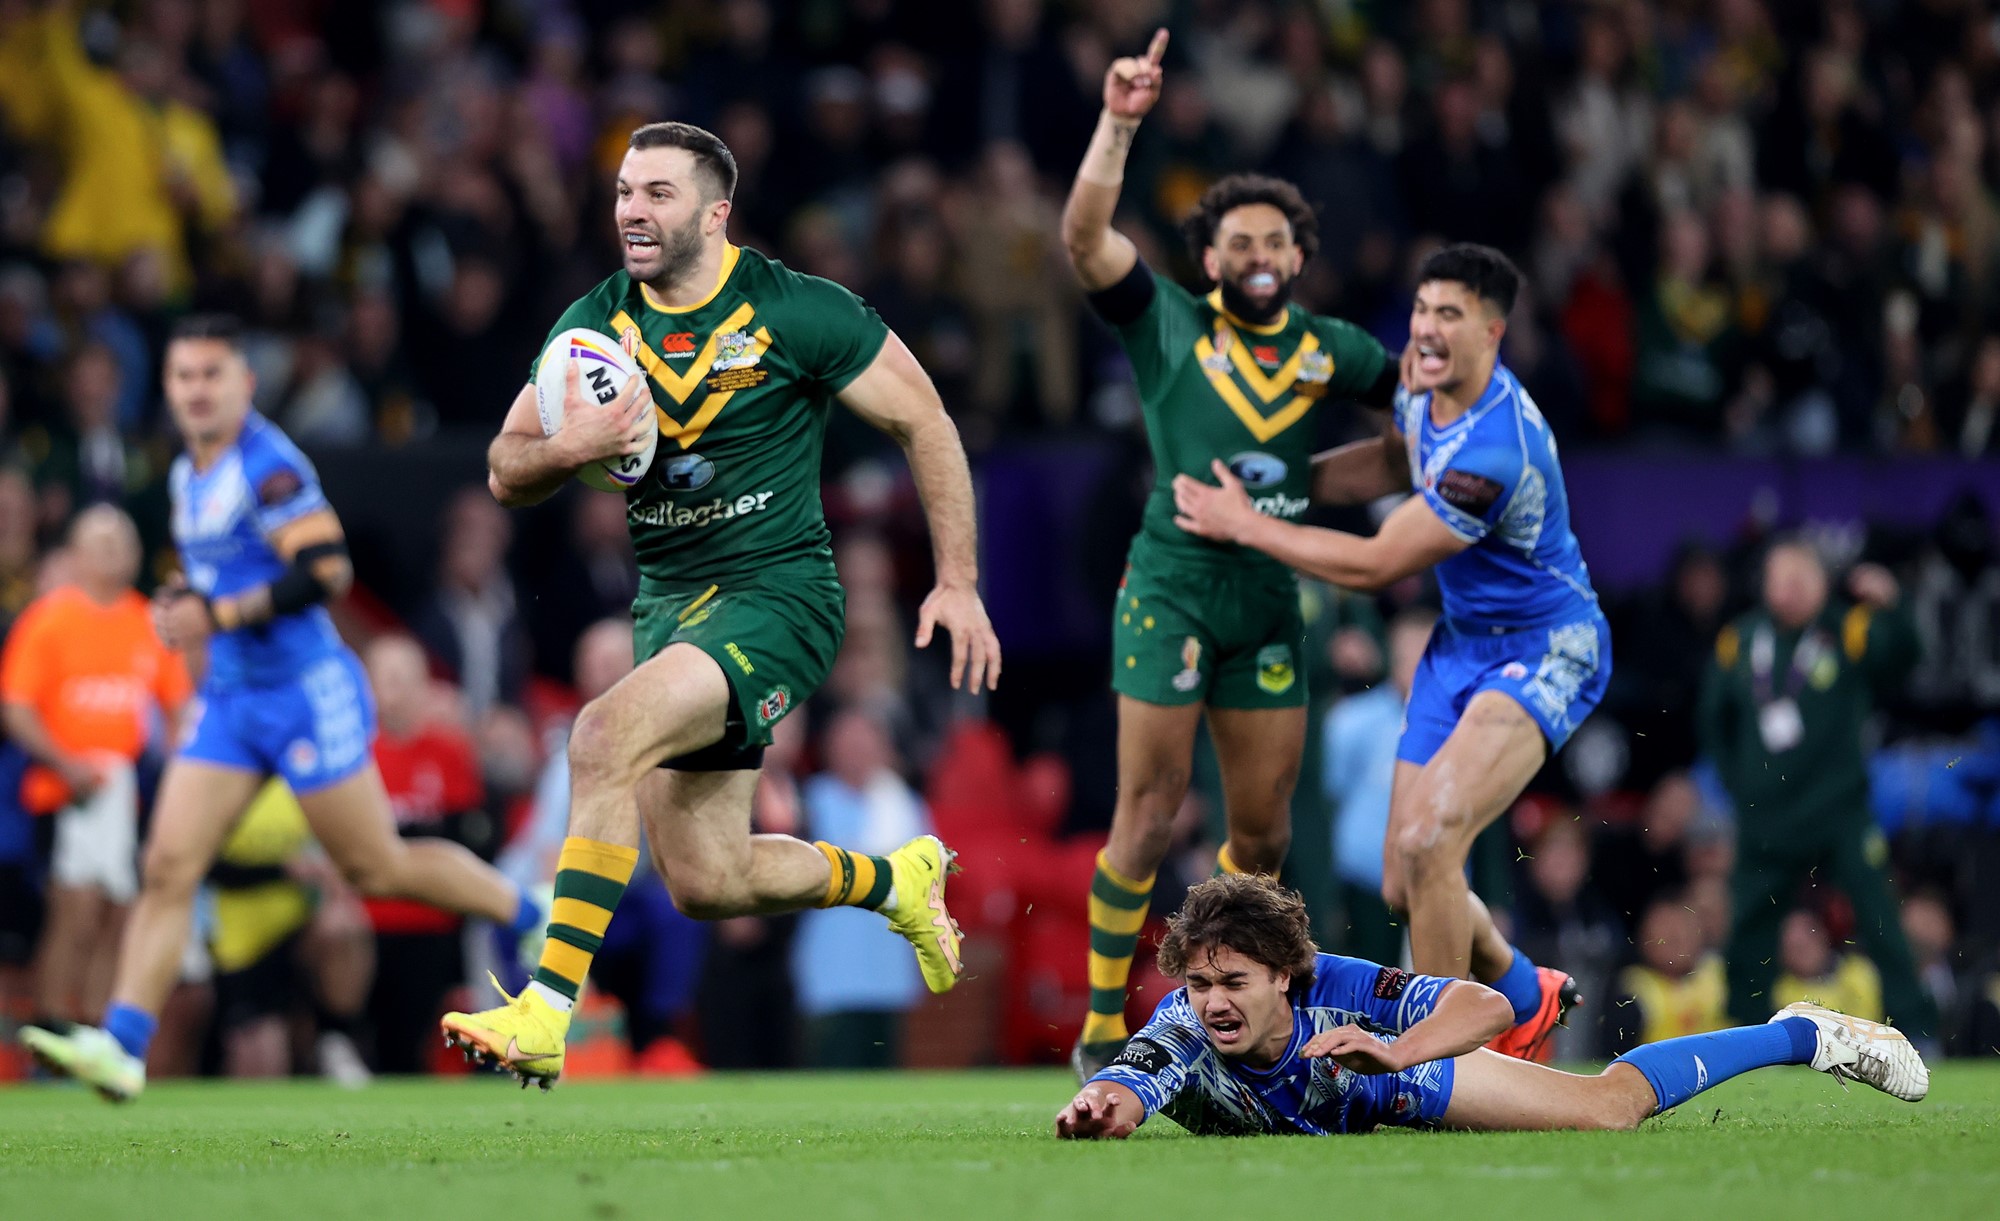 Kangaroos beat Samoa 30-10 in mens Rugby League World Cup final